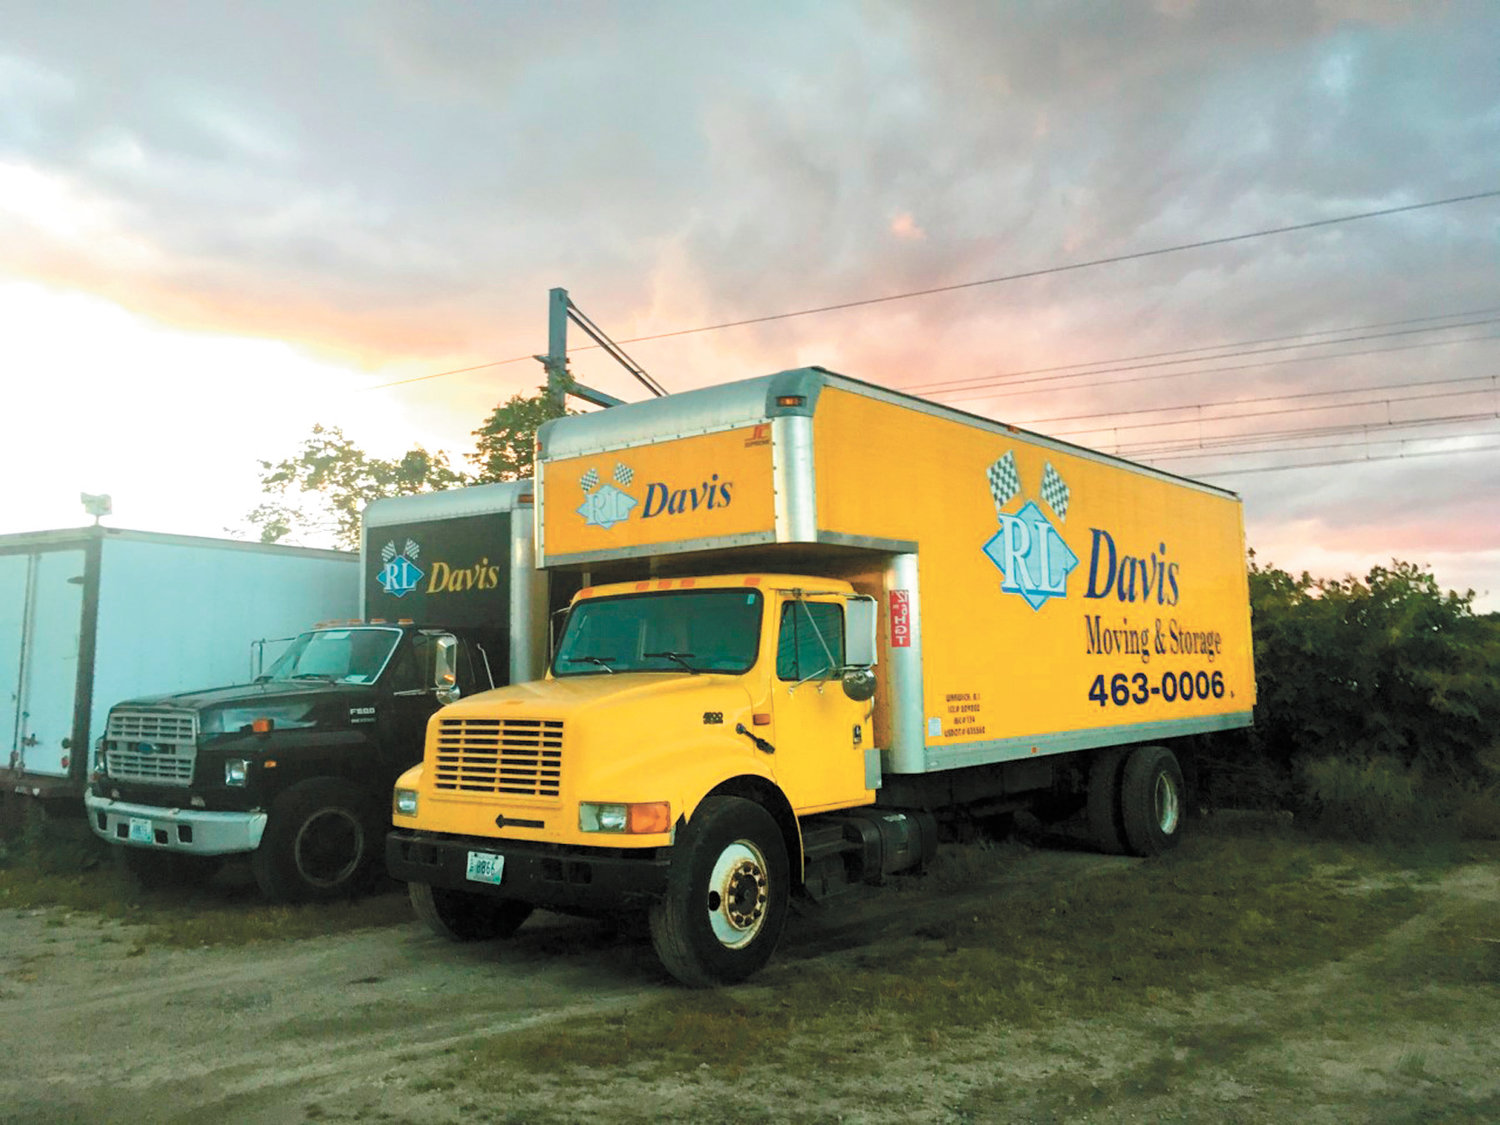 Look for this familiar yellow truck in your neighborhood from the local moving company RL Davis Moving & Storage whose history in New England goes back generations.